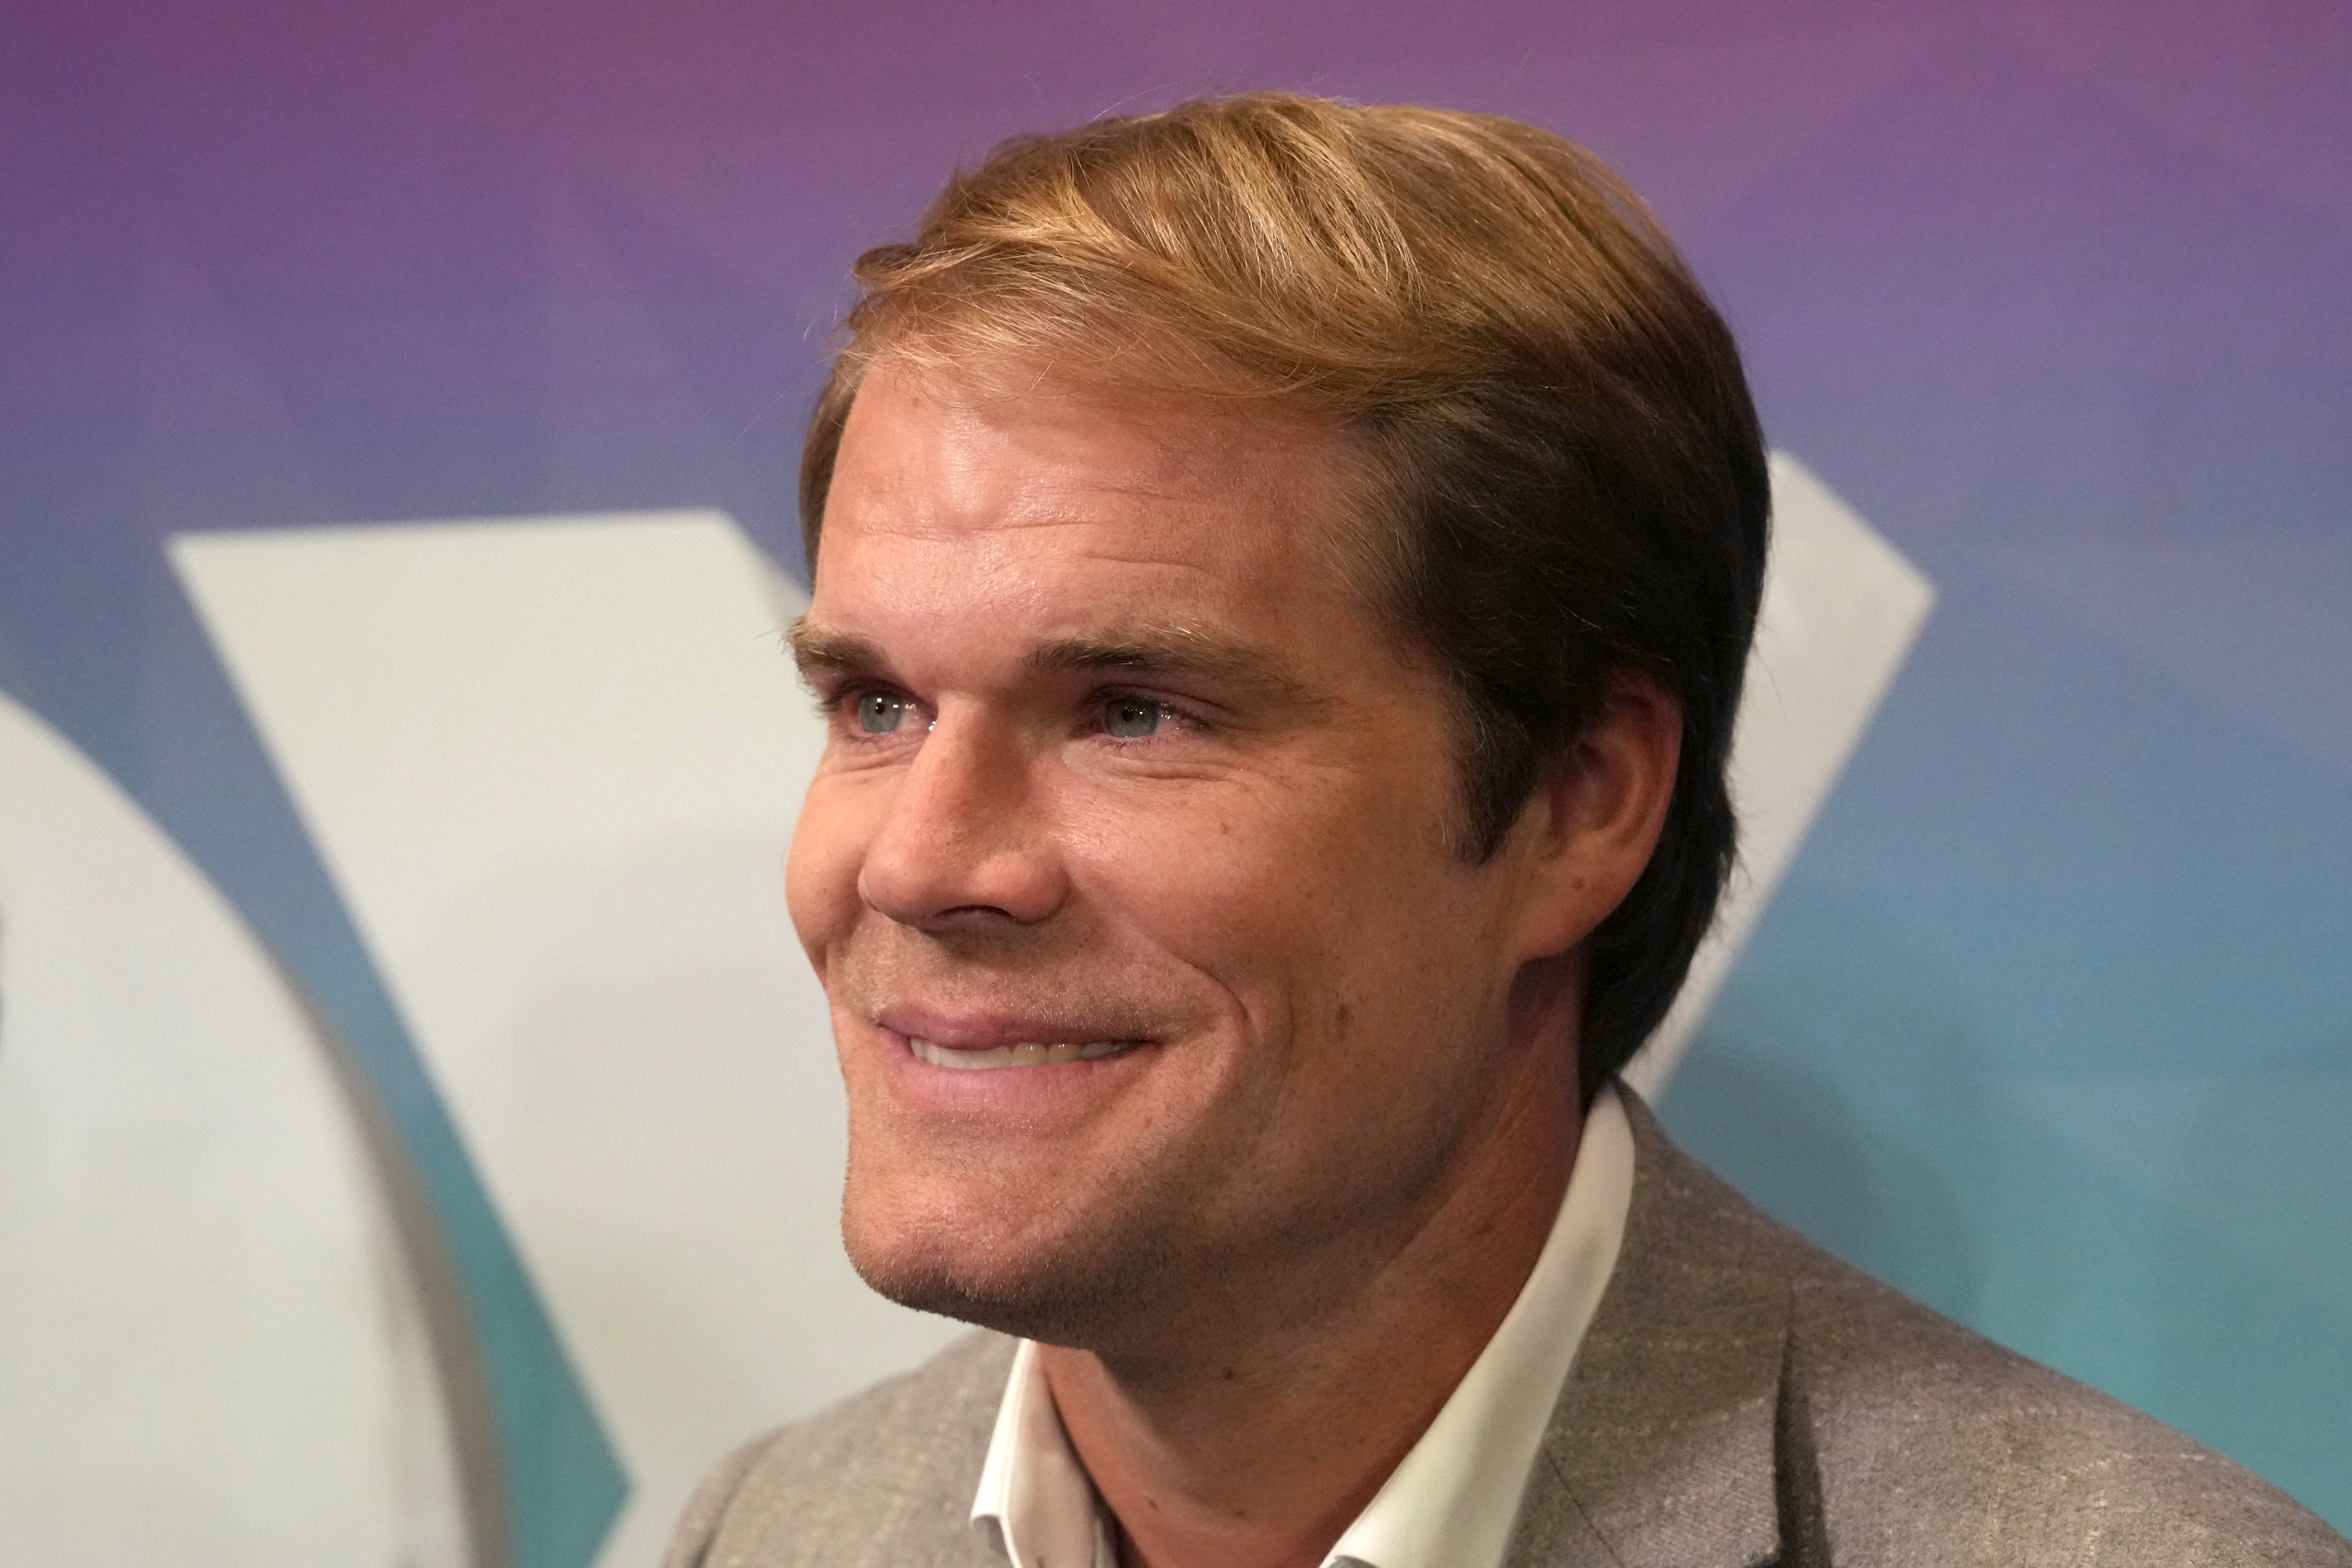 Panthers great Greg Olsen speaks about getting demoted at FOX for Tom Brady